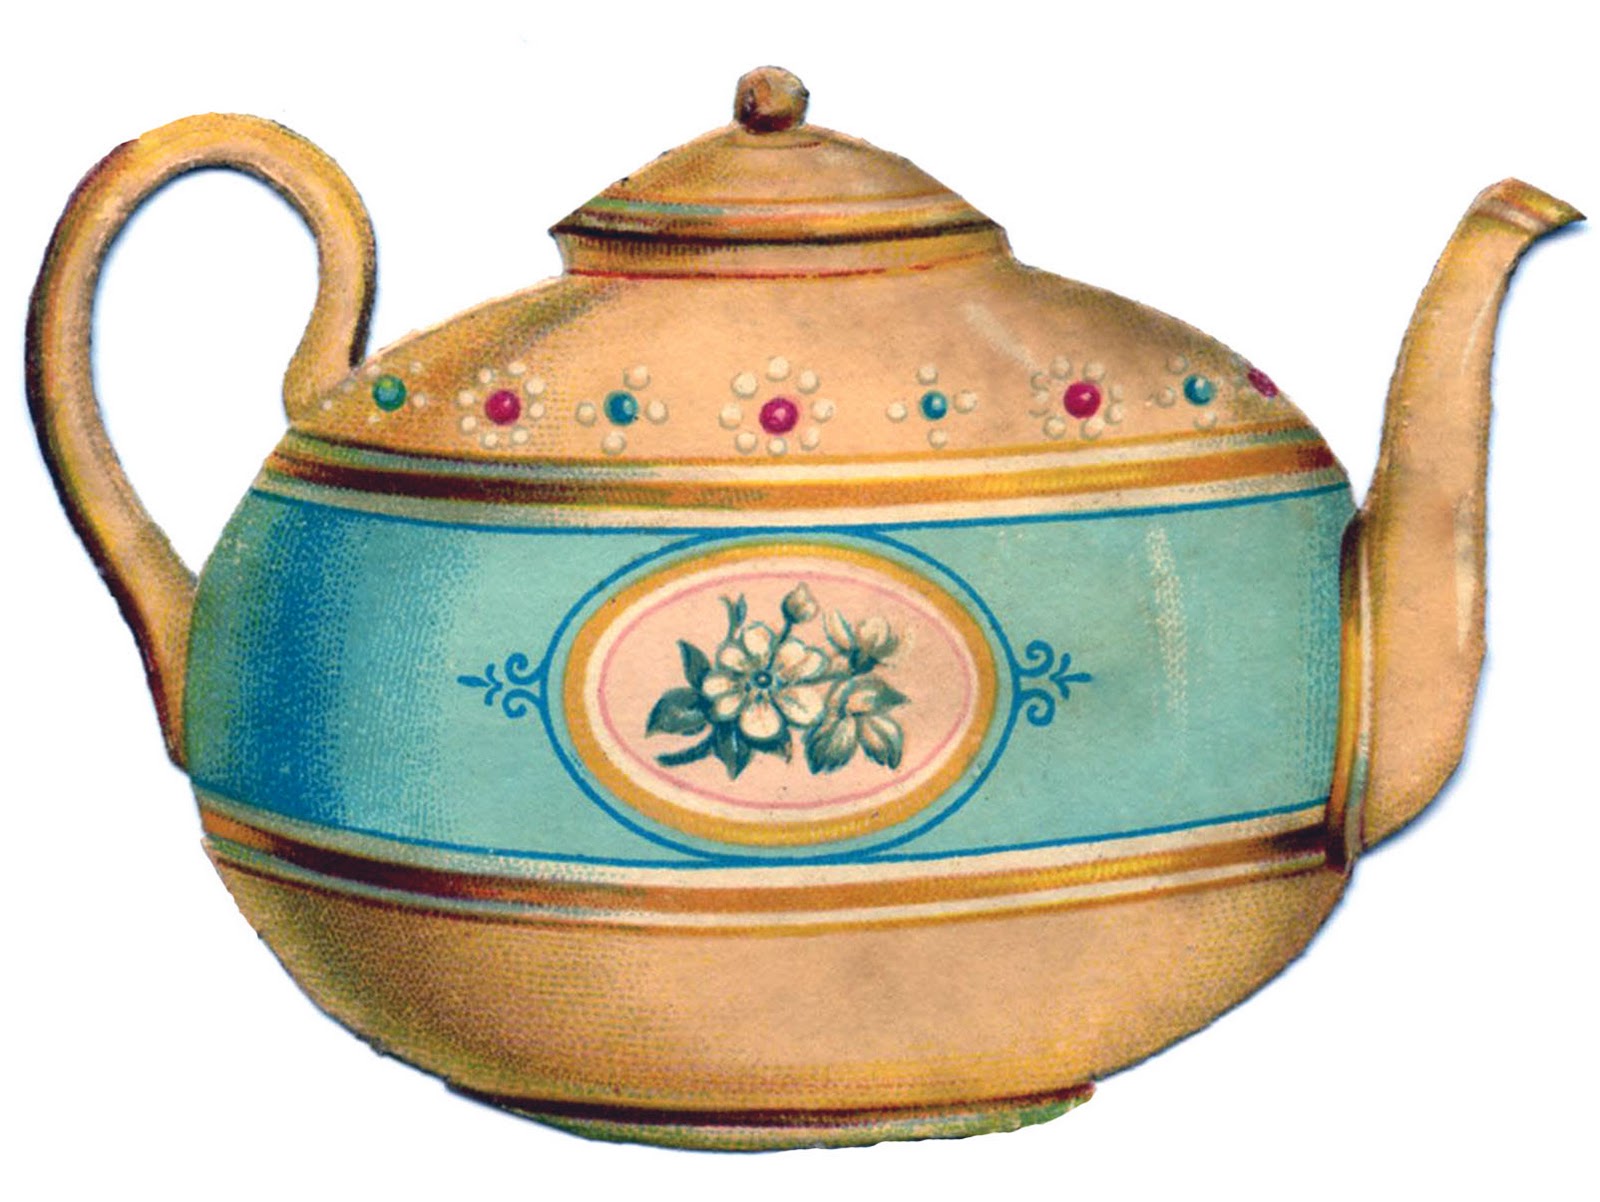 Victorian Graphic - Cute Teapot - The Graphics Fairy